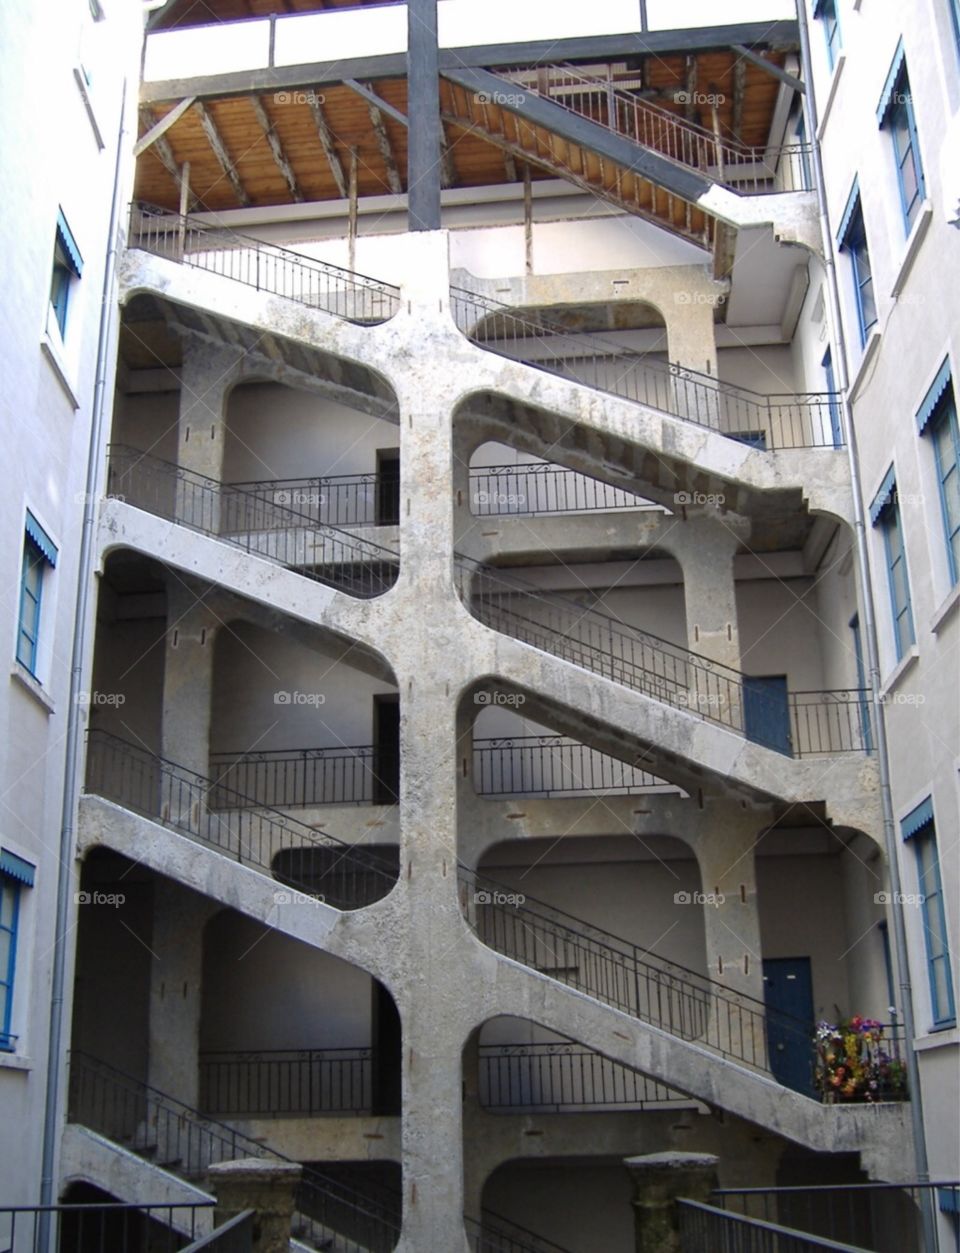 Unique staircase in an alley. Lyon, France. 